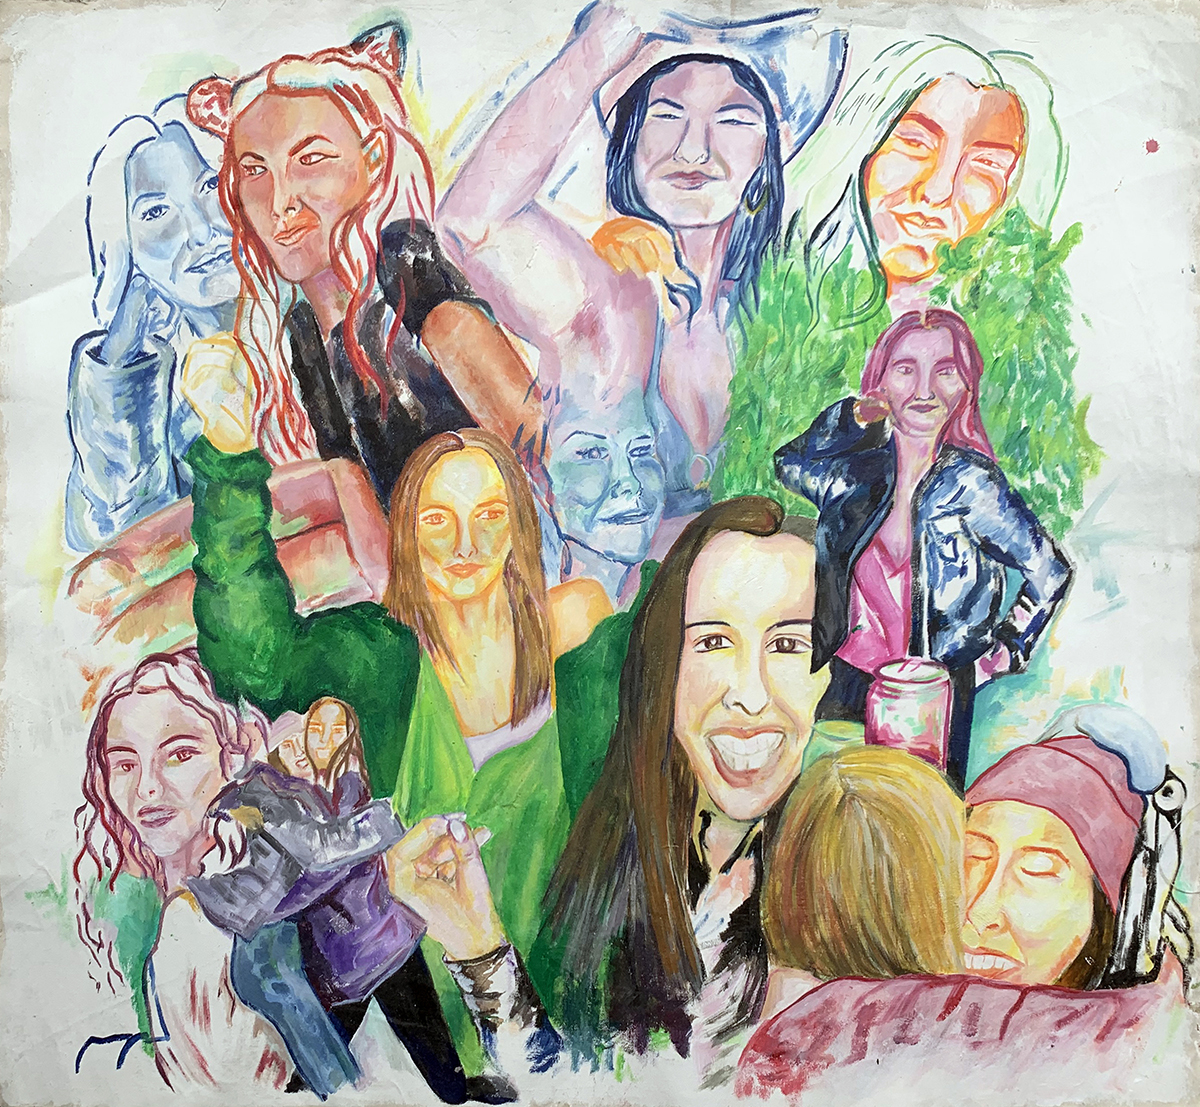 Pile of Women, acrylic on canvas painting by Mia Boulukos.